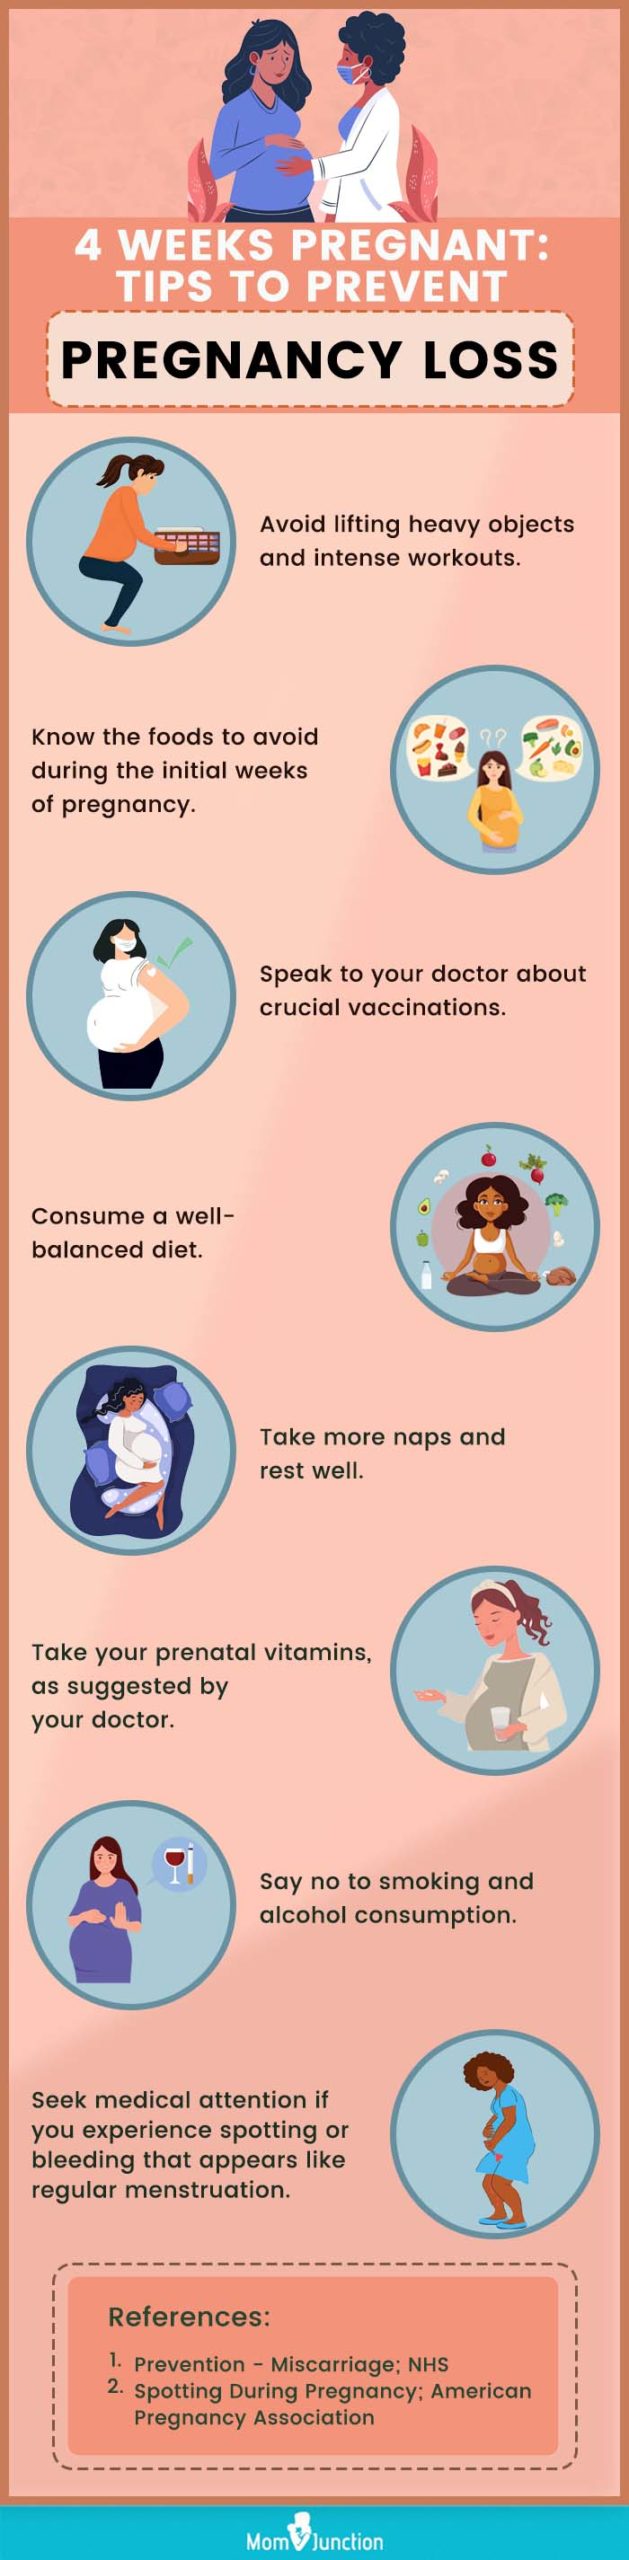 tips to reduce miscarriage risk at four weeks pregnant [infographic]